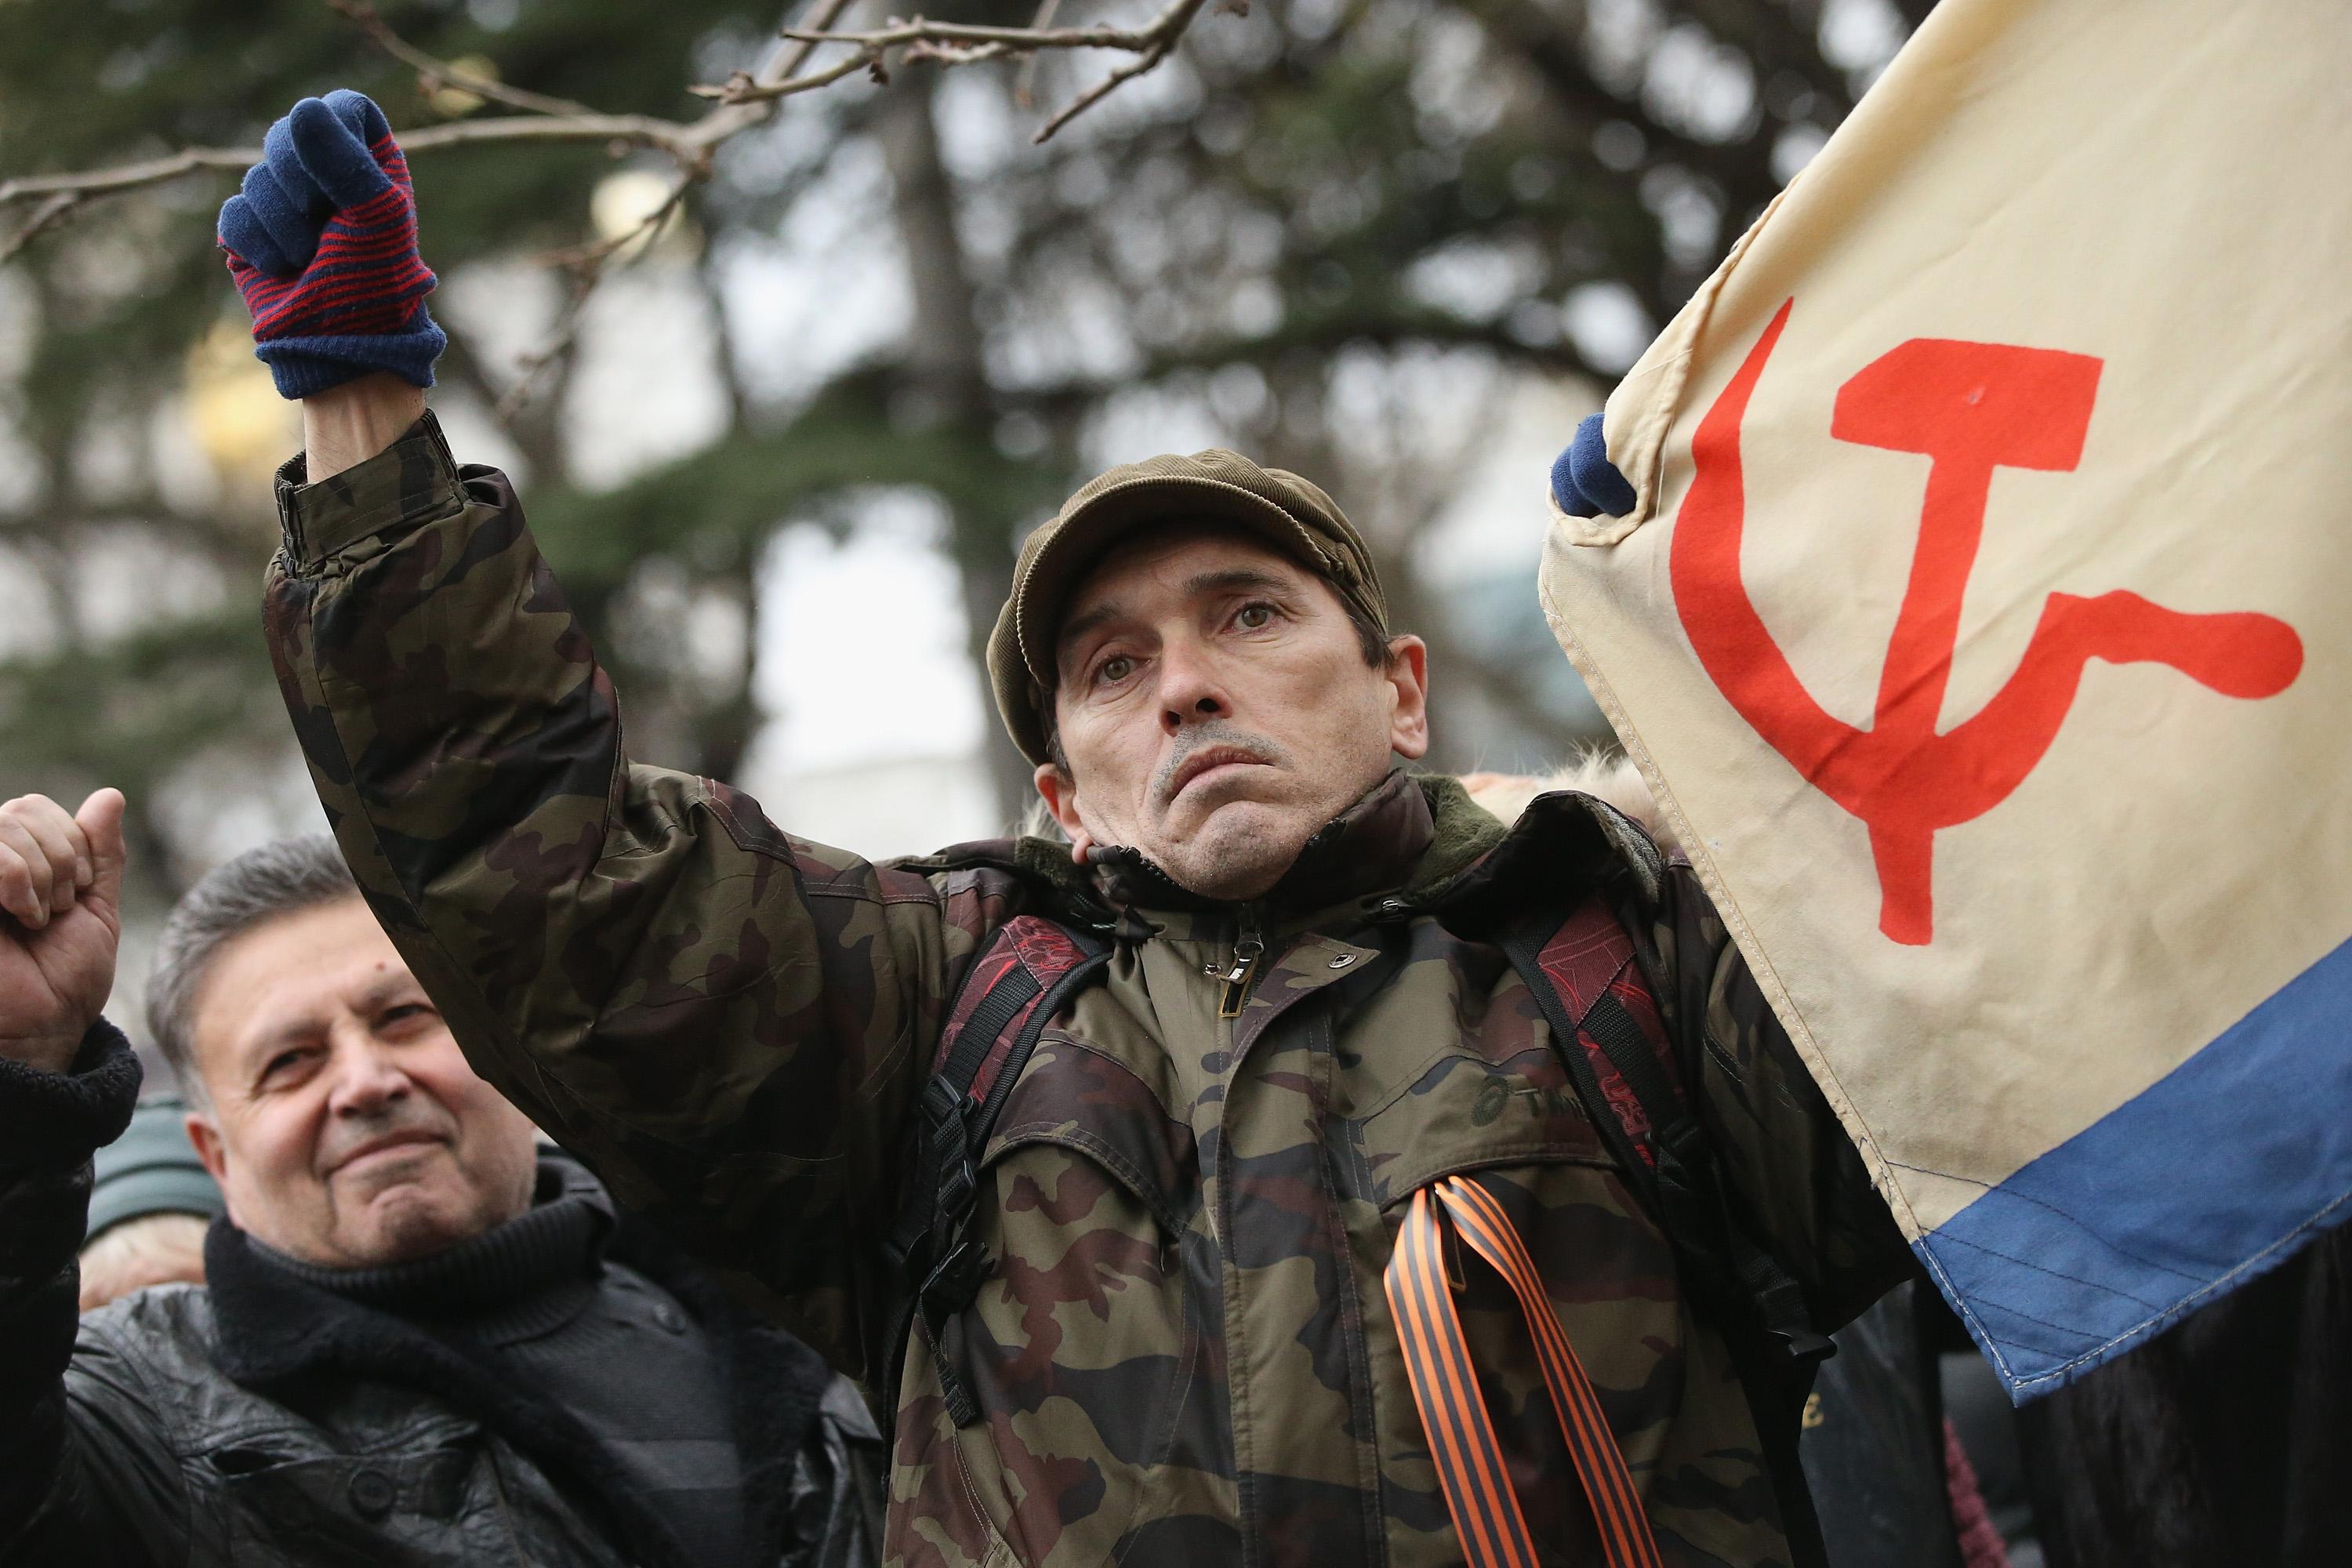 Pro-Russia protesters take to the streets across Ukraine